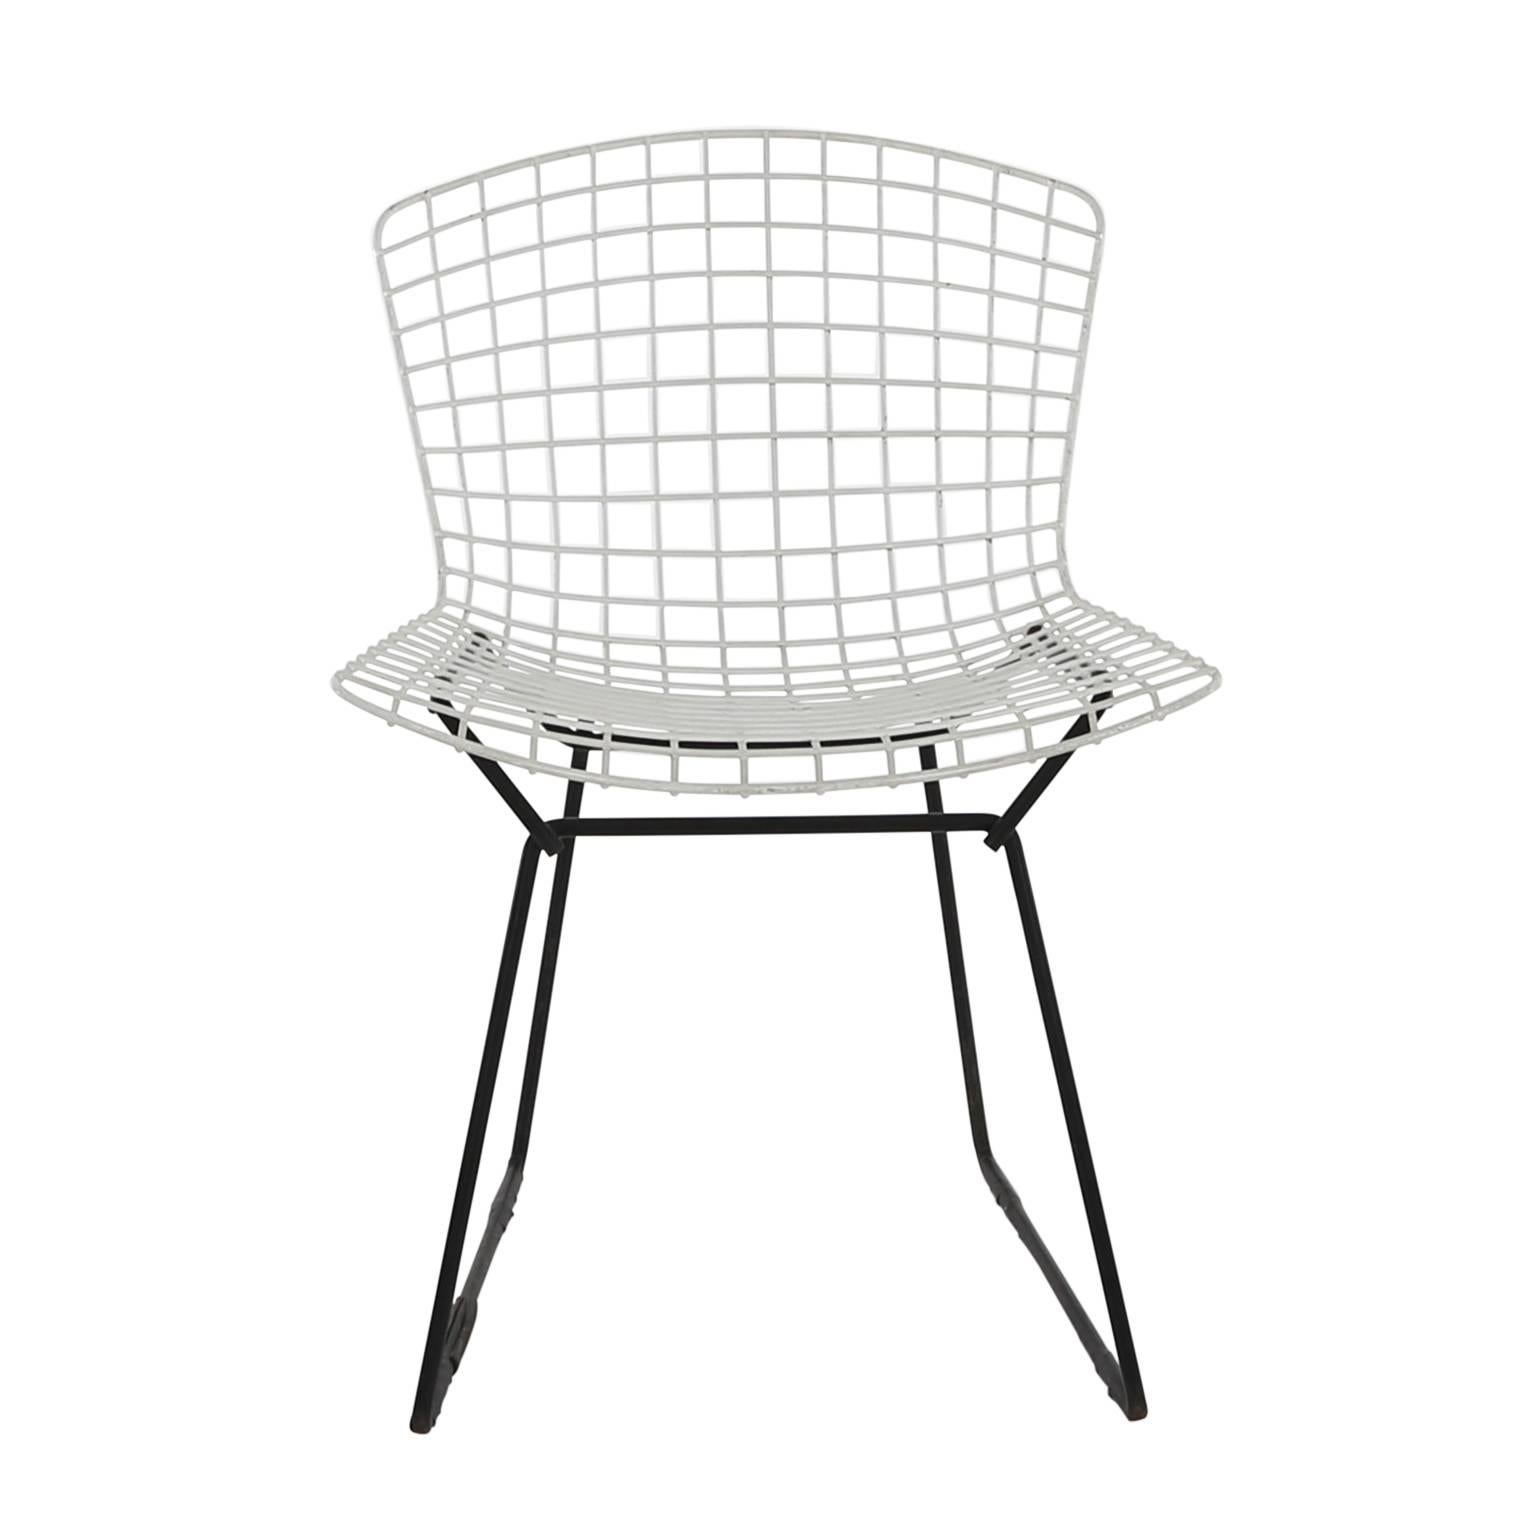 Harry Bertoia's delicately Industrial side chair is among the most recognized achievements of Mid-Century Modern design. Like Saarinen and Mies, Bertoia found sublime grace in an Industrial material, elevating it beyond its normal utility into a